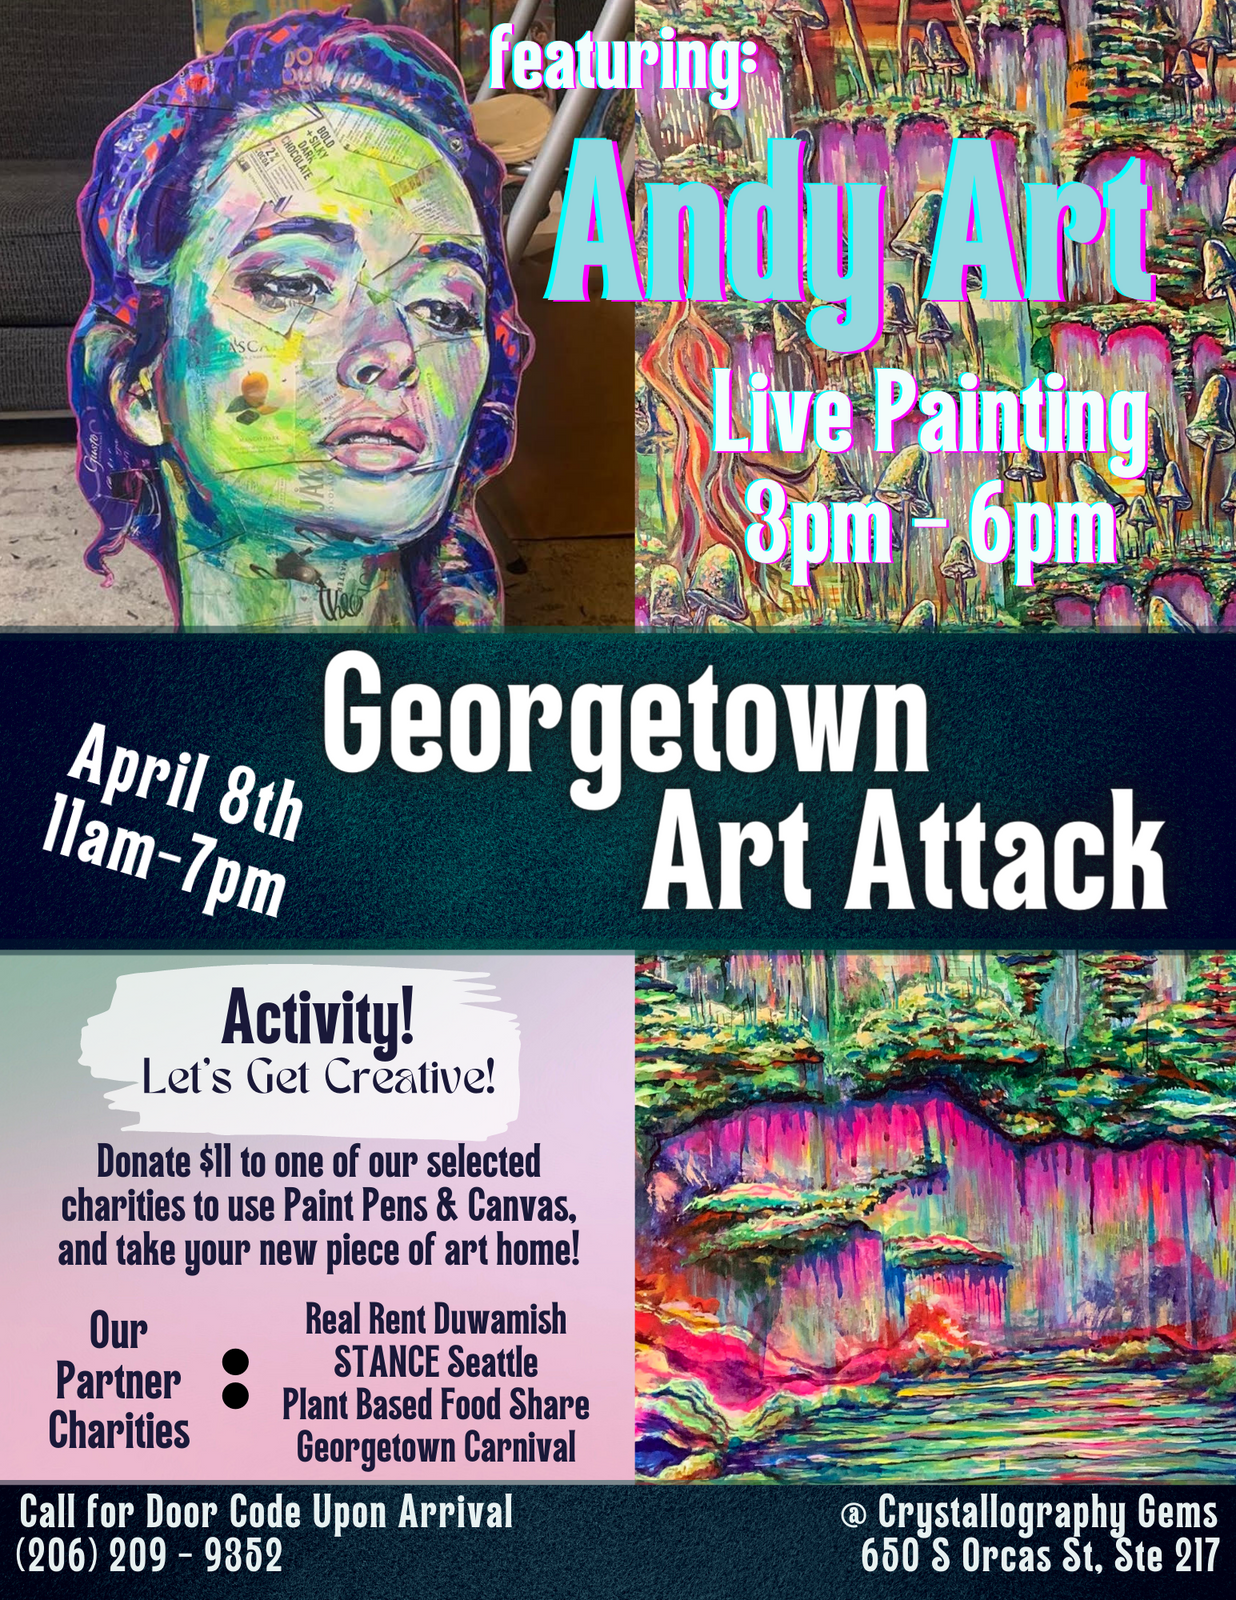 Georgetown Art Attack, featuring Andy Art